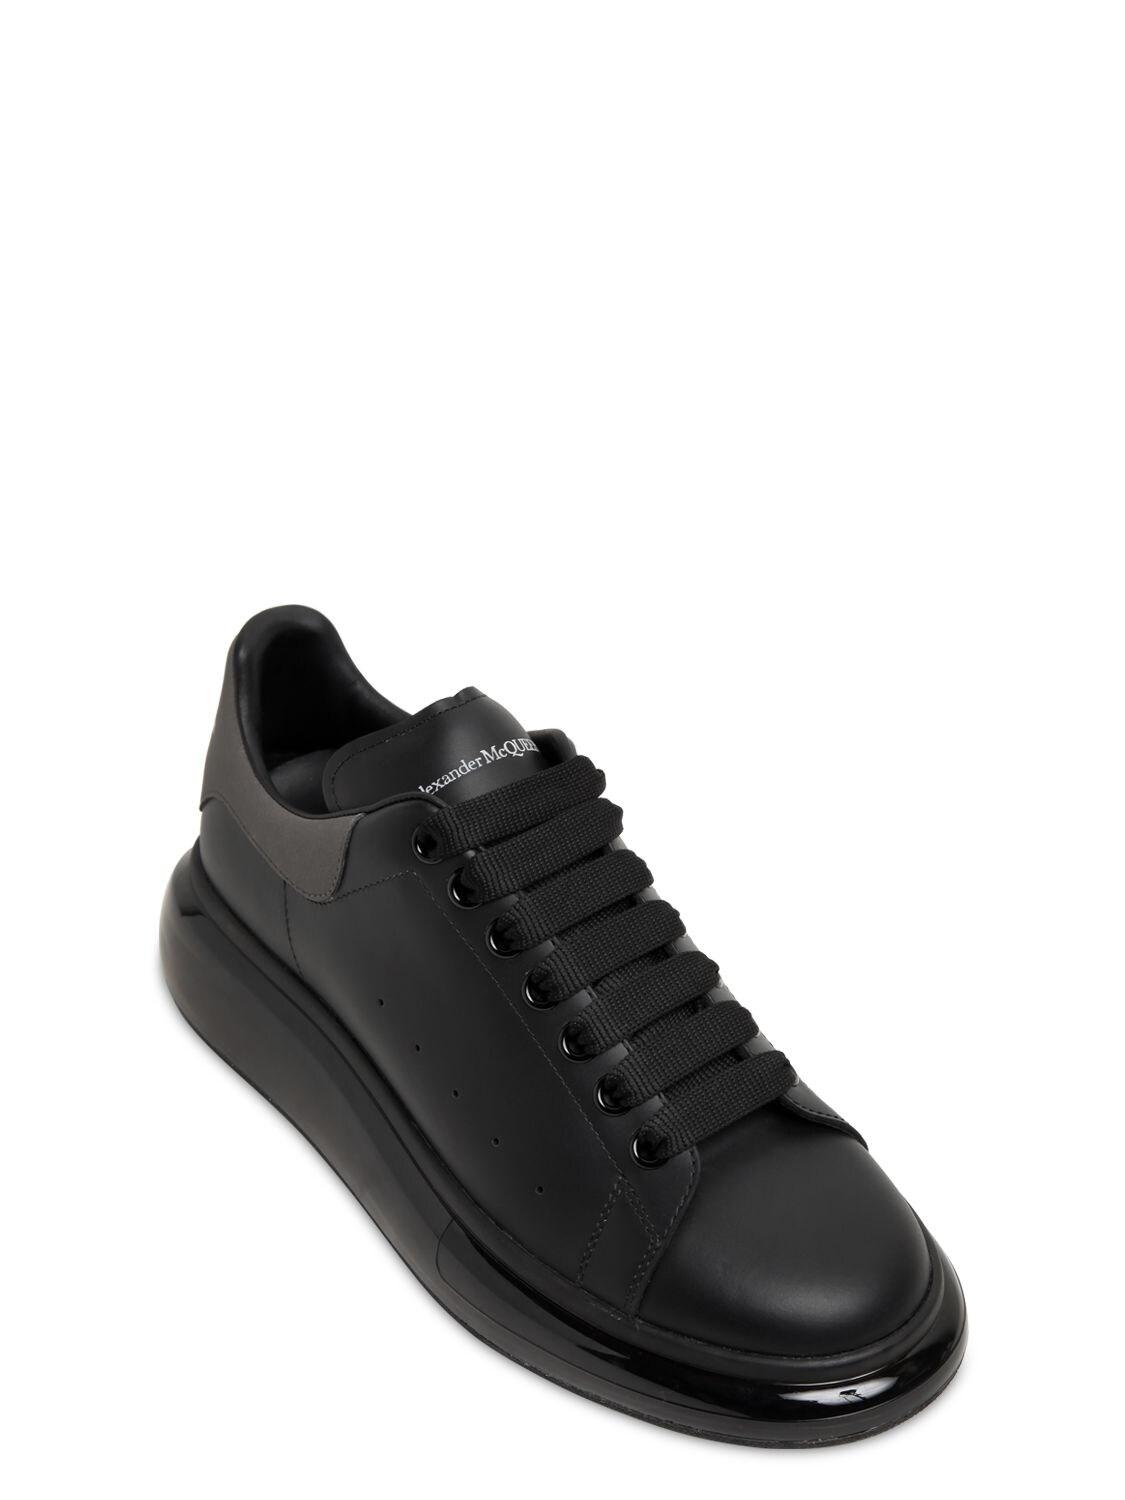 Alexander McQueen 45mm Air Reflect Leather Sneakers in Black for Men - Lyst